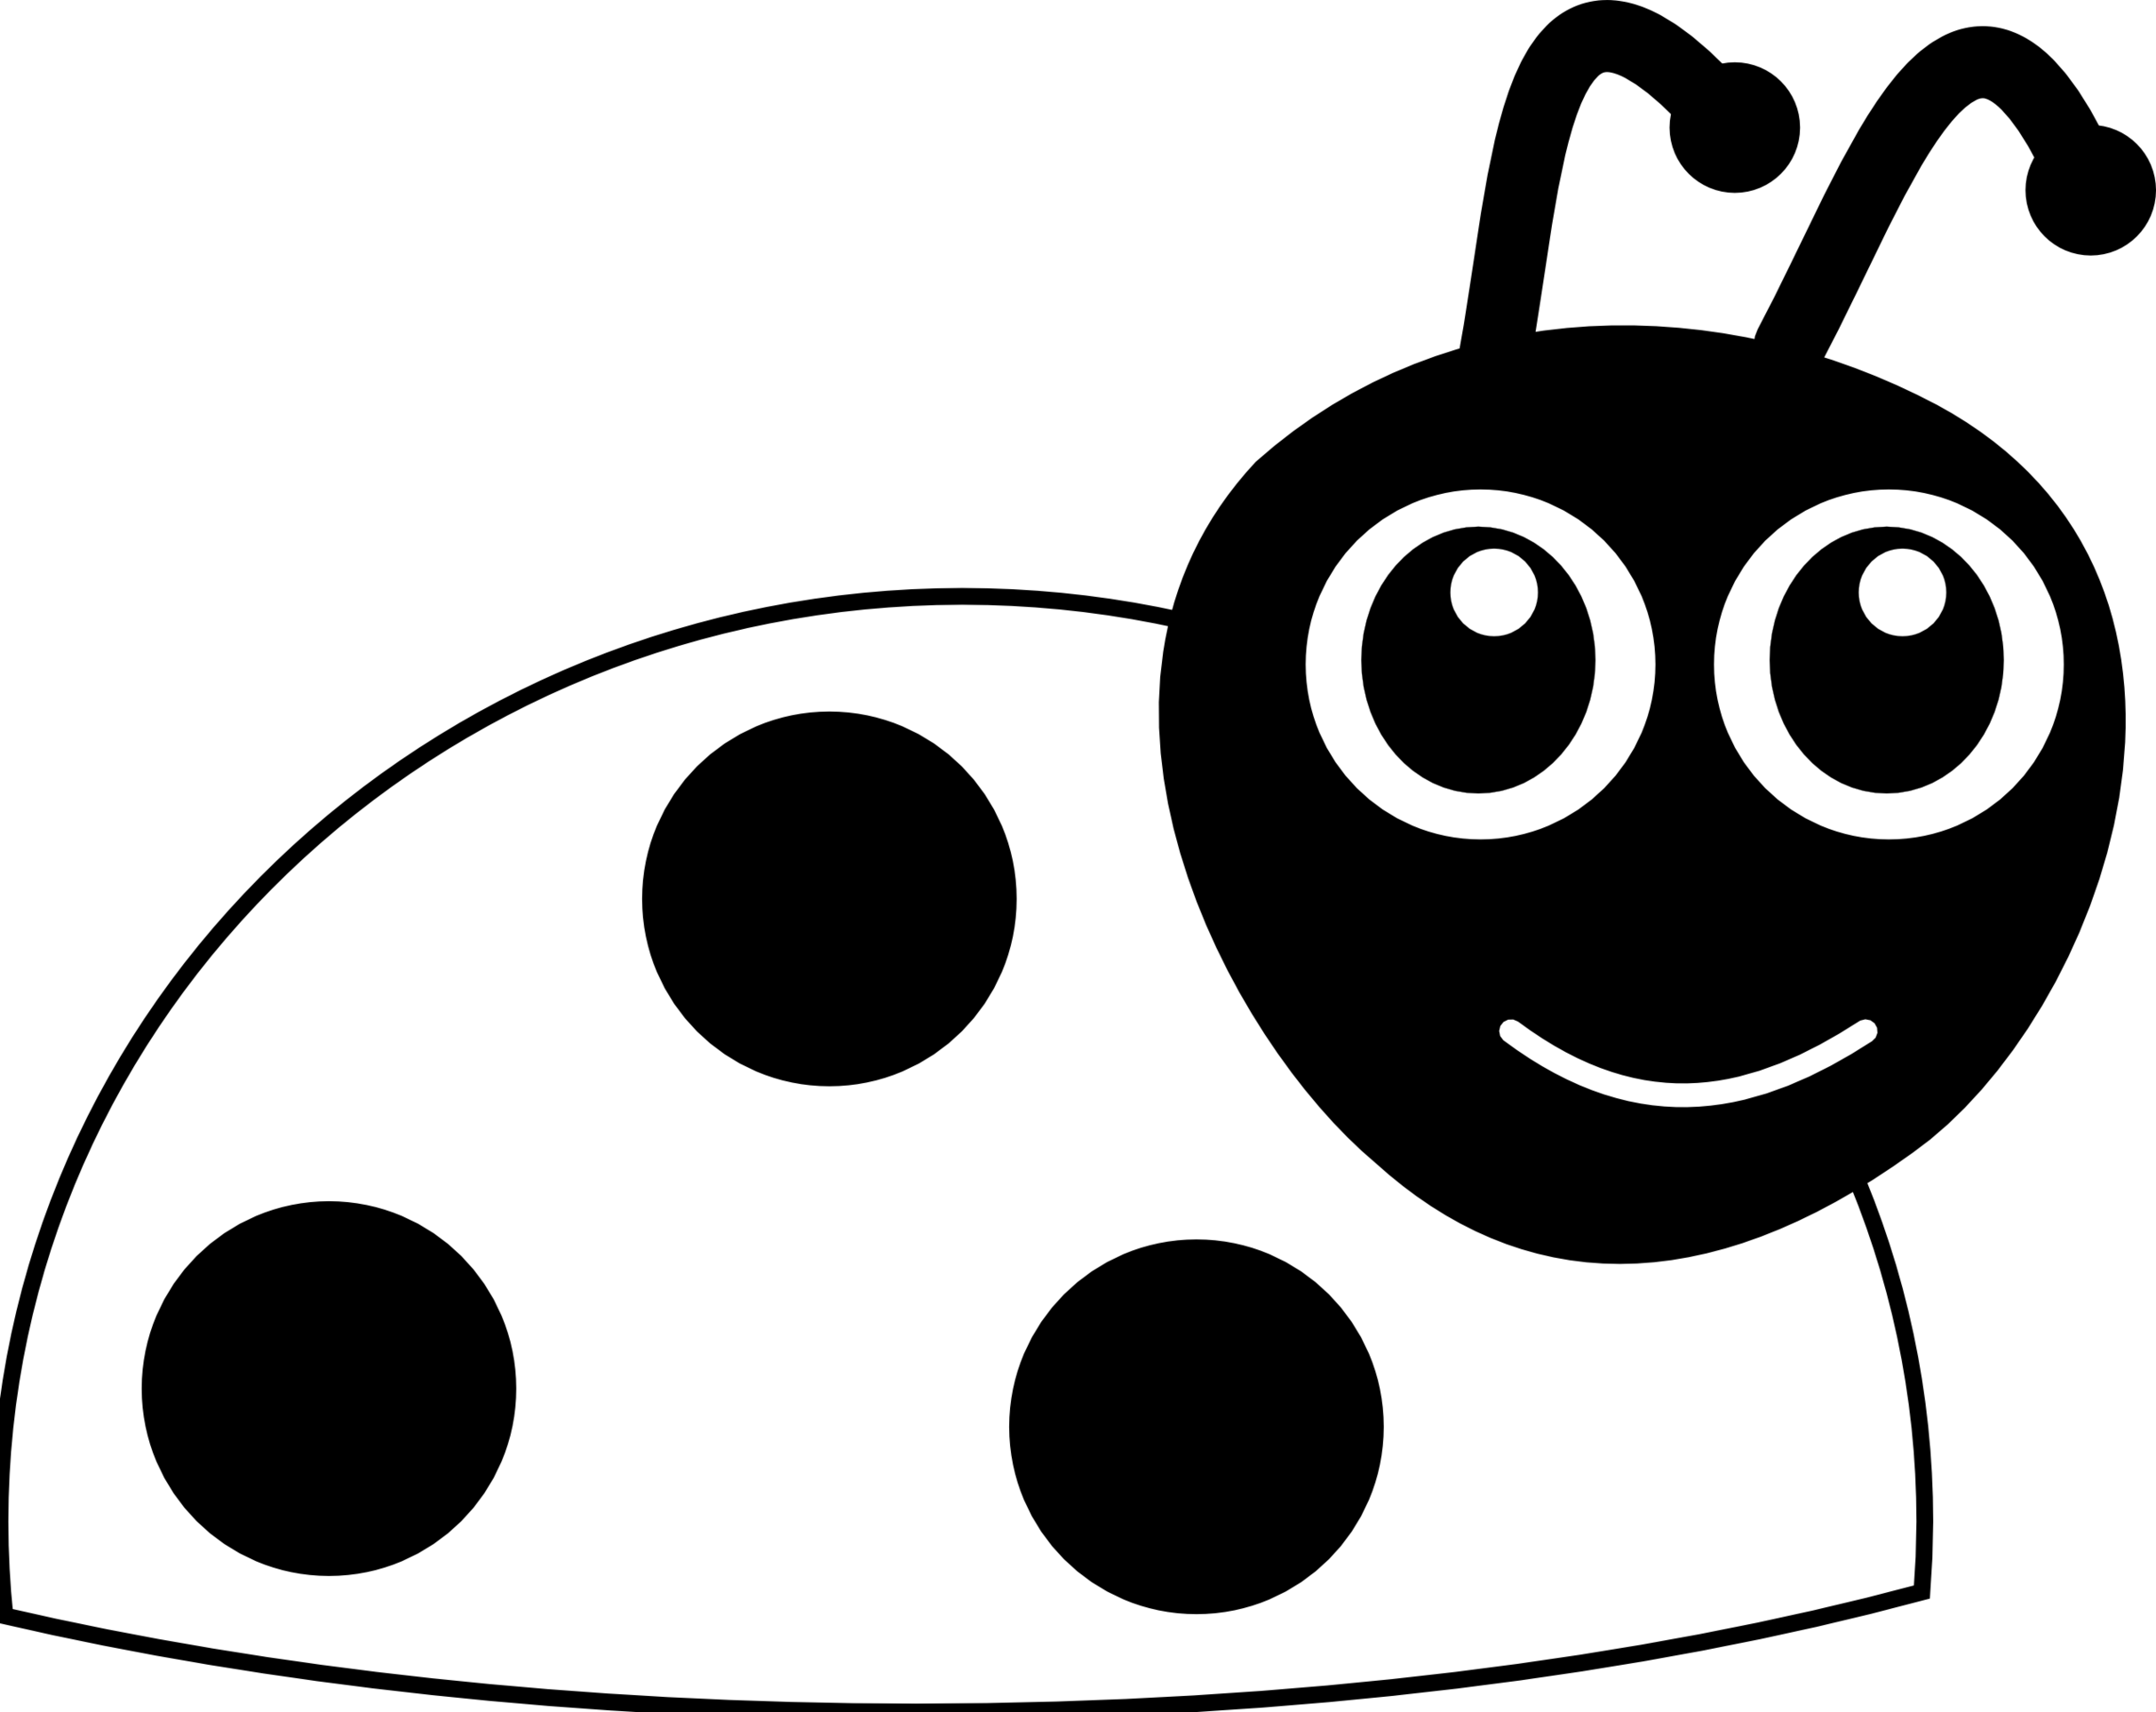 Free Lady Bug Black And White Clip Art Clipart - Free to use Clip ...